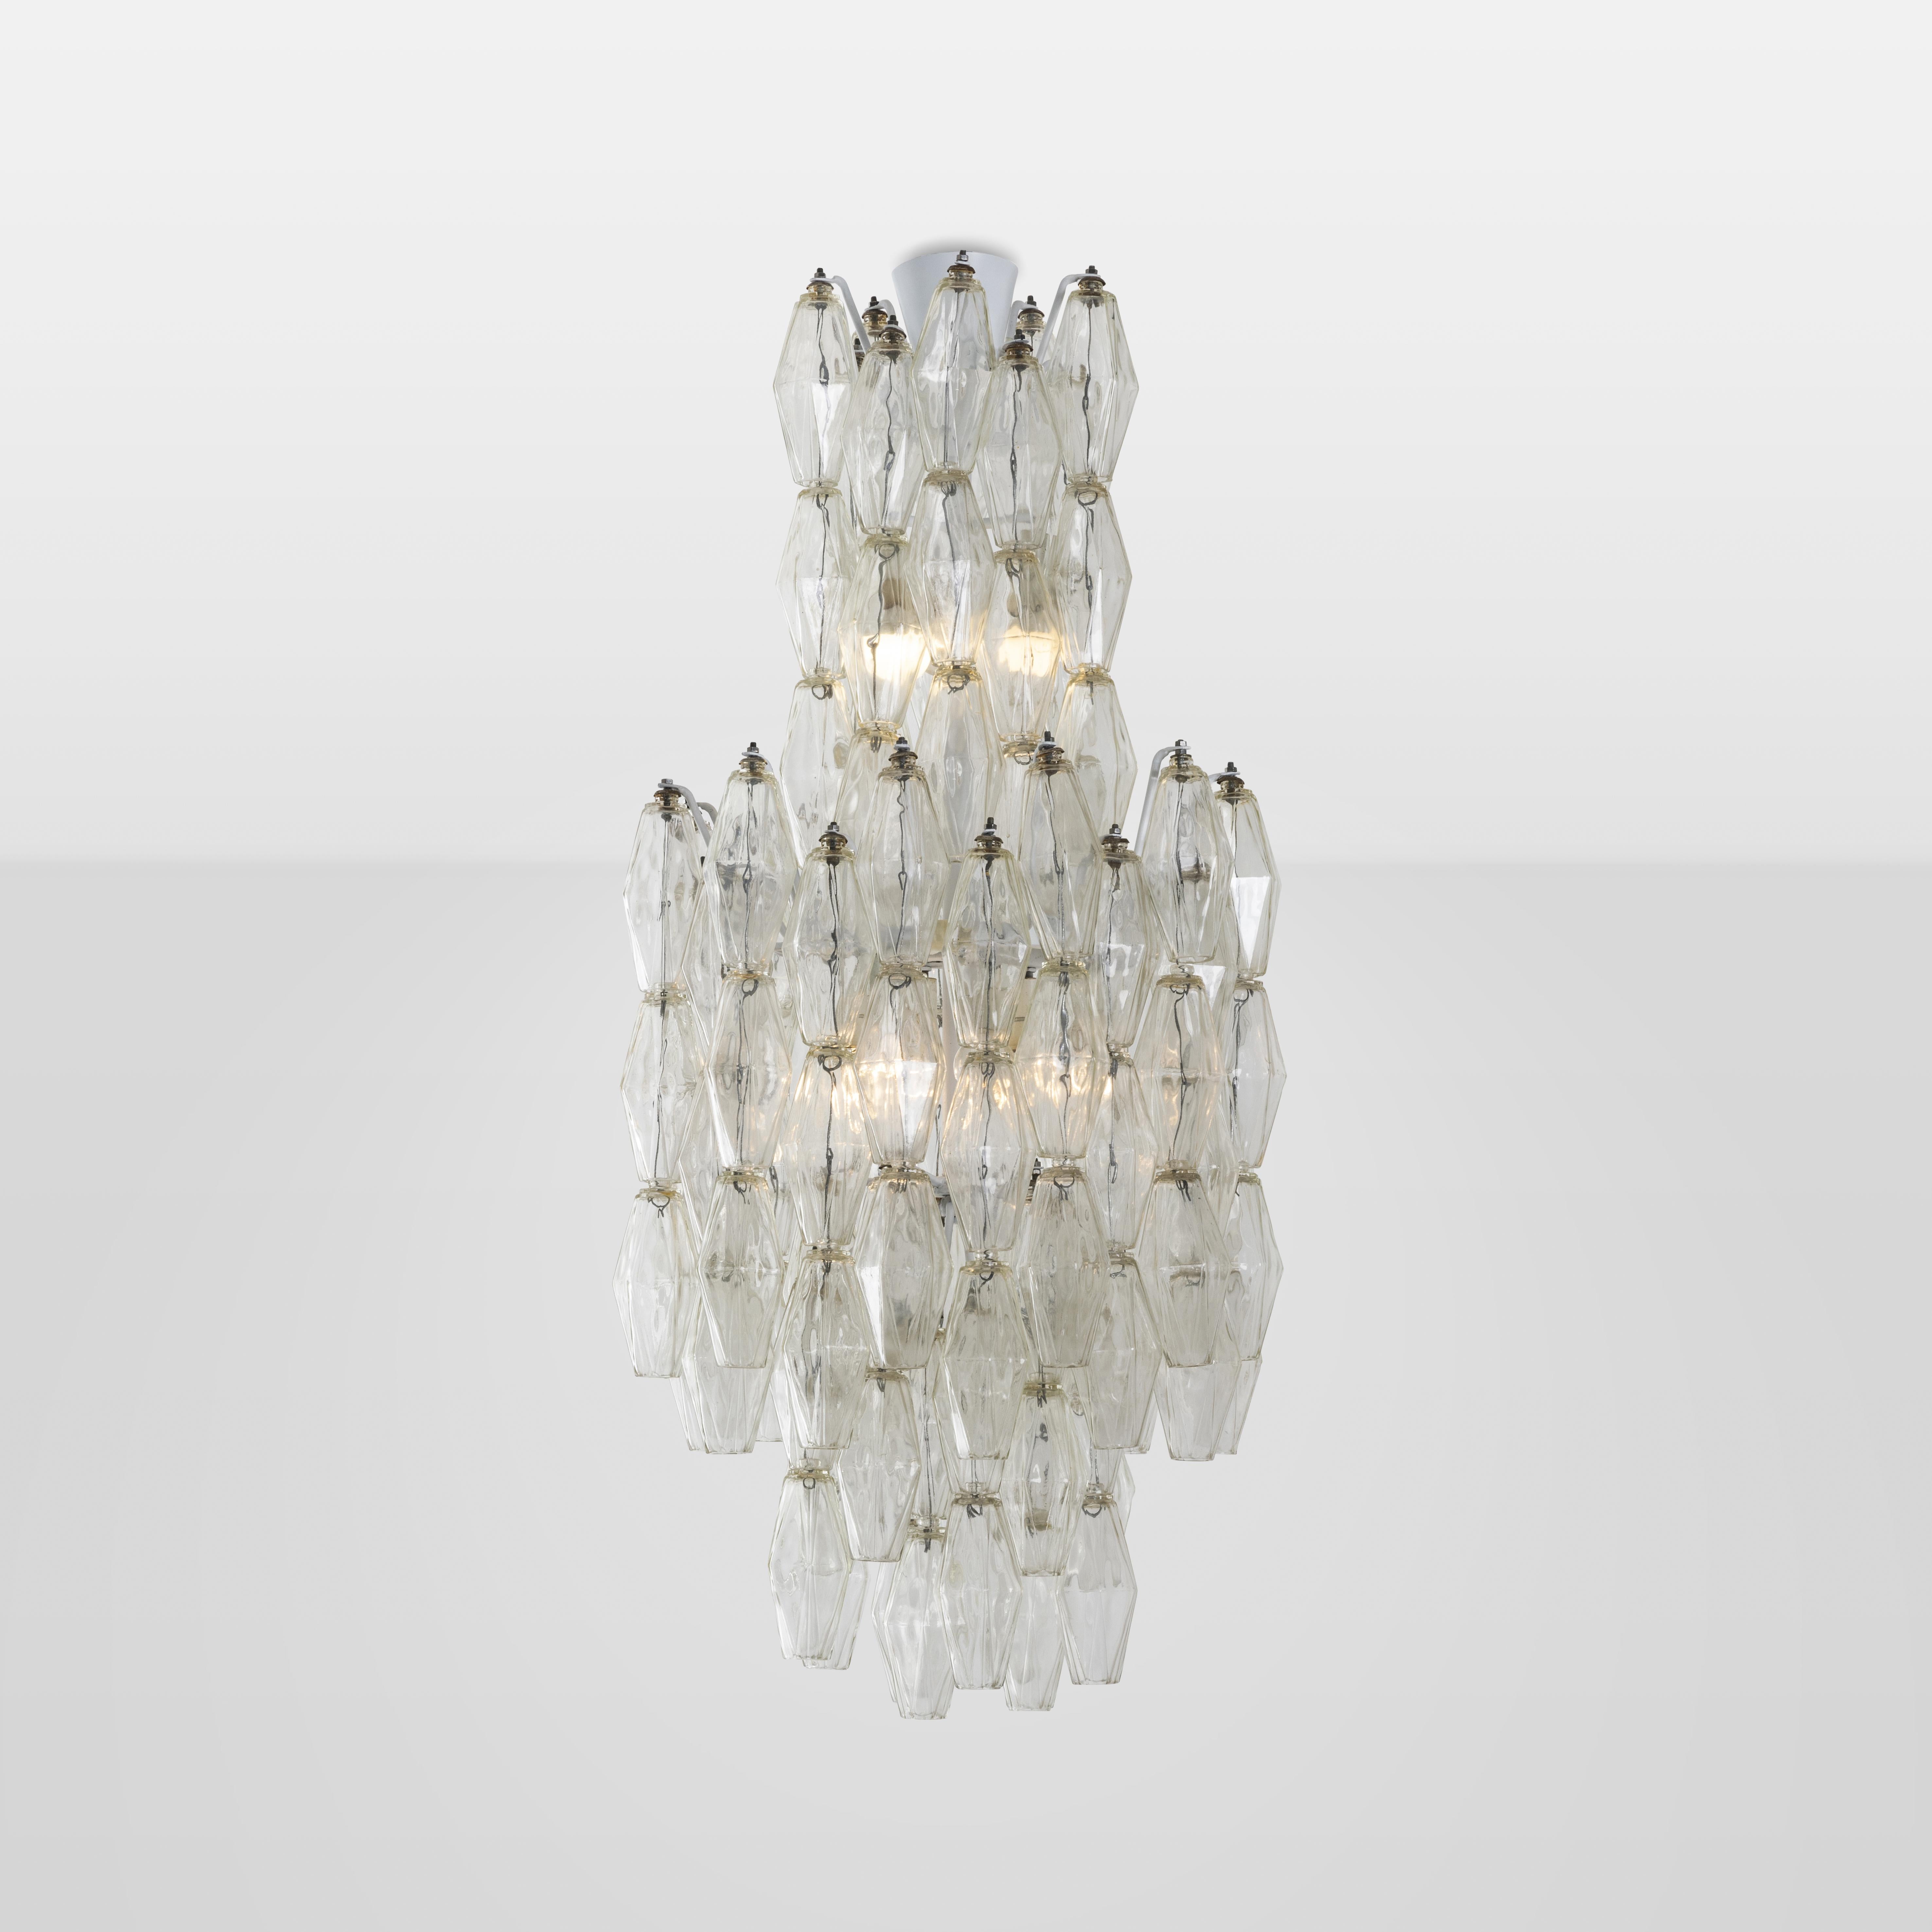 A great classic of Carlo Scarpa's creations for Venini is the system of elements called Poliedri: a clever and elegant system for modeling lighting in shapes from time to time suited to spaces. This chandelier is original from the 1960s with the